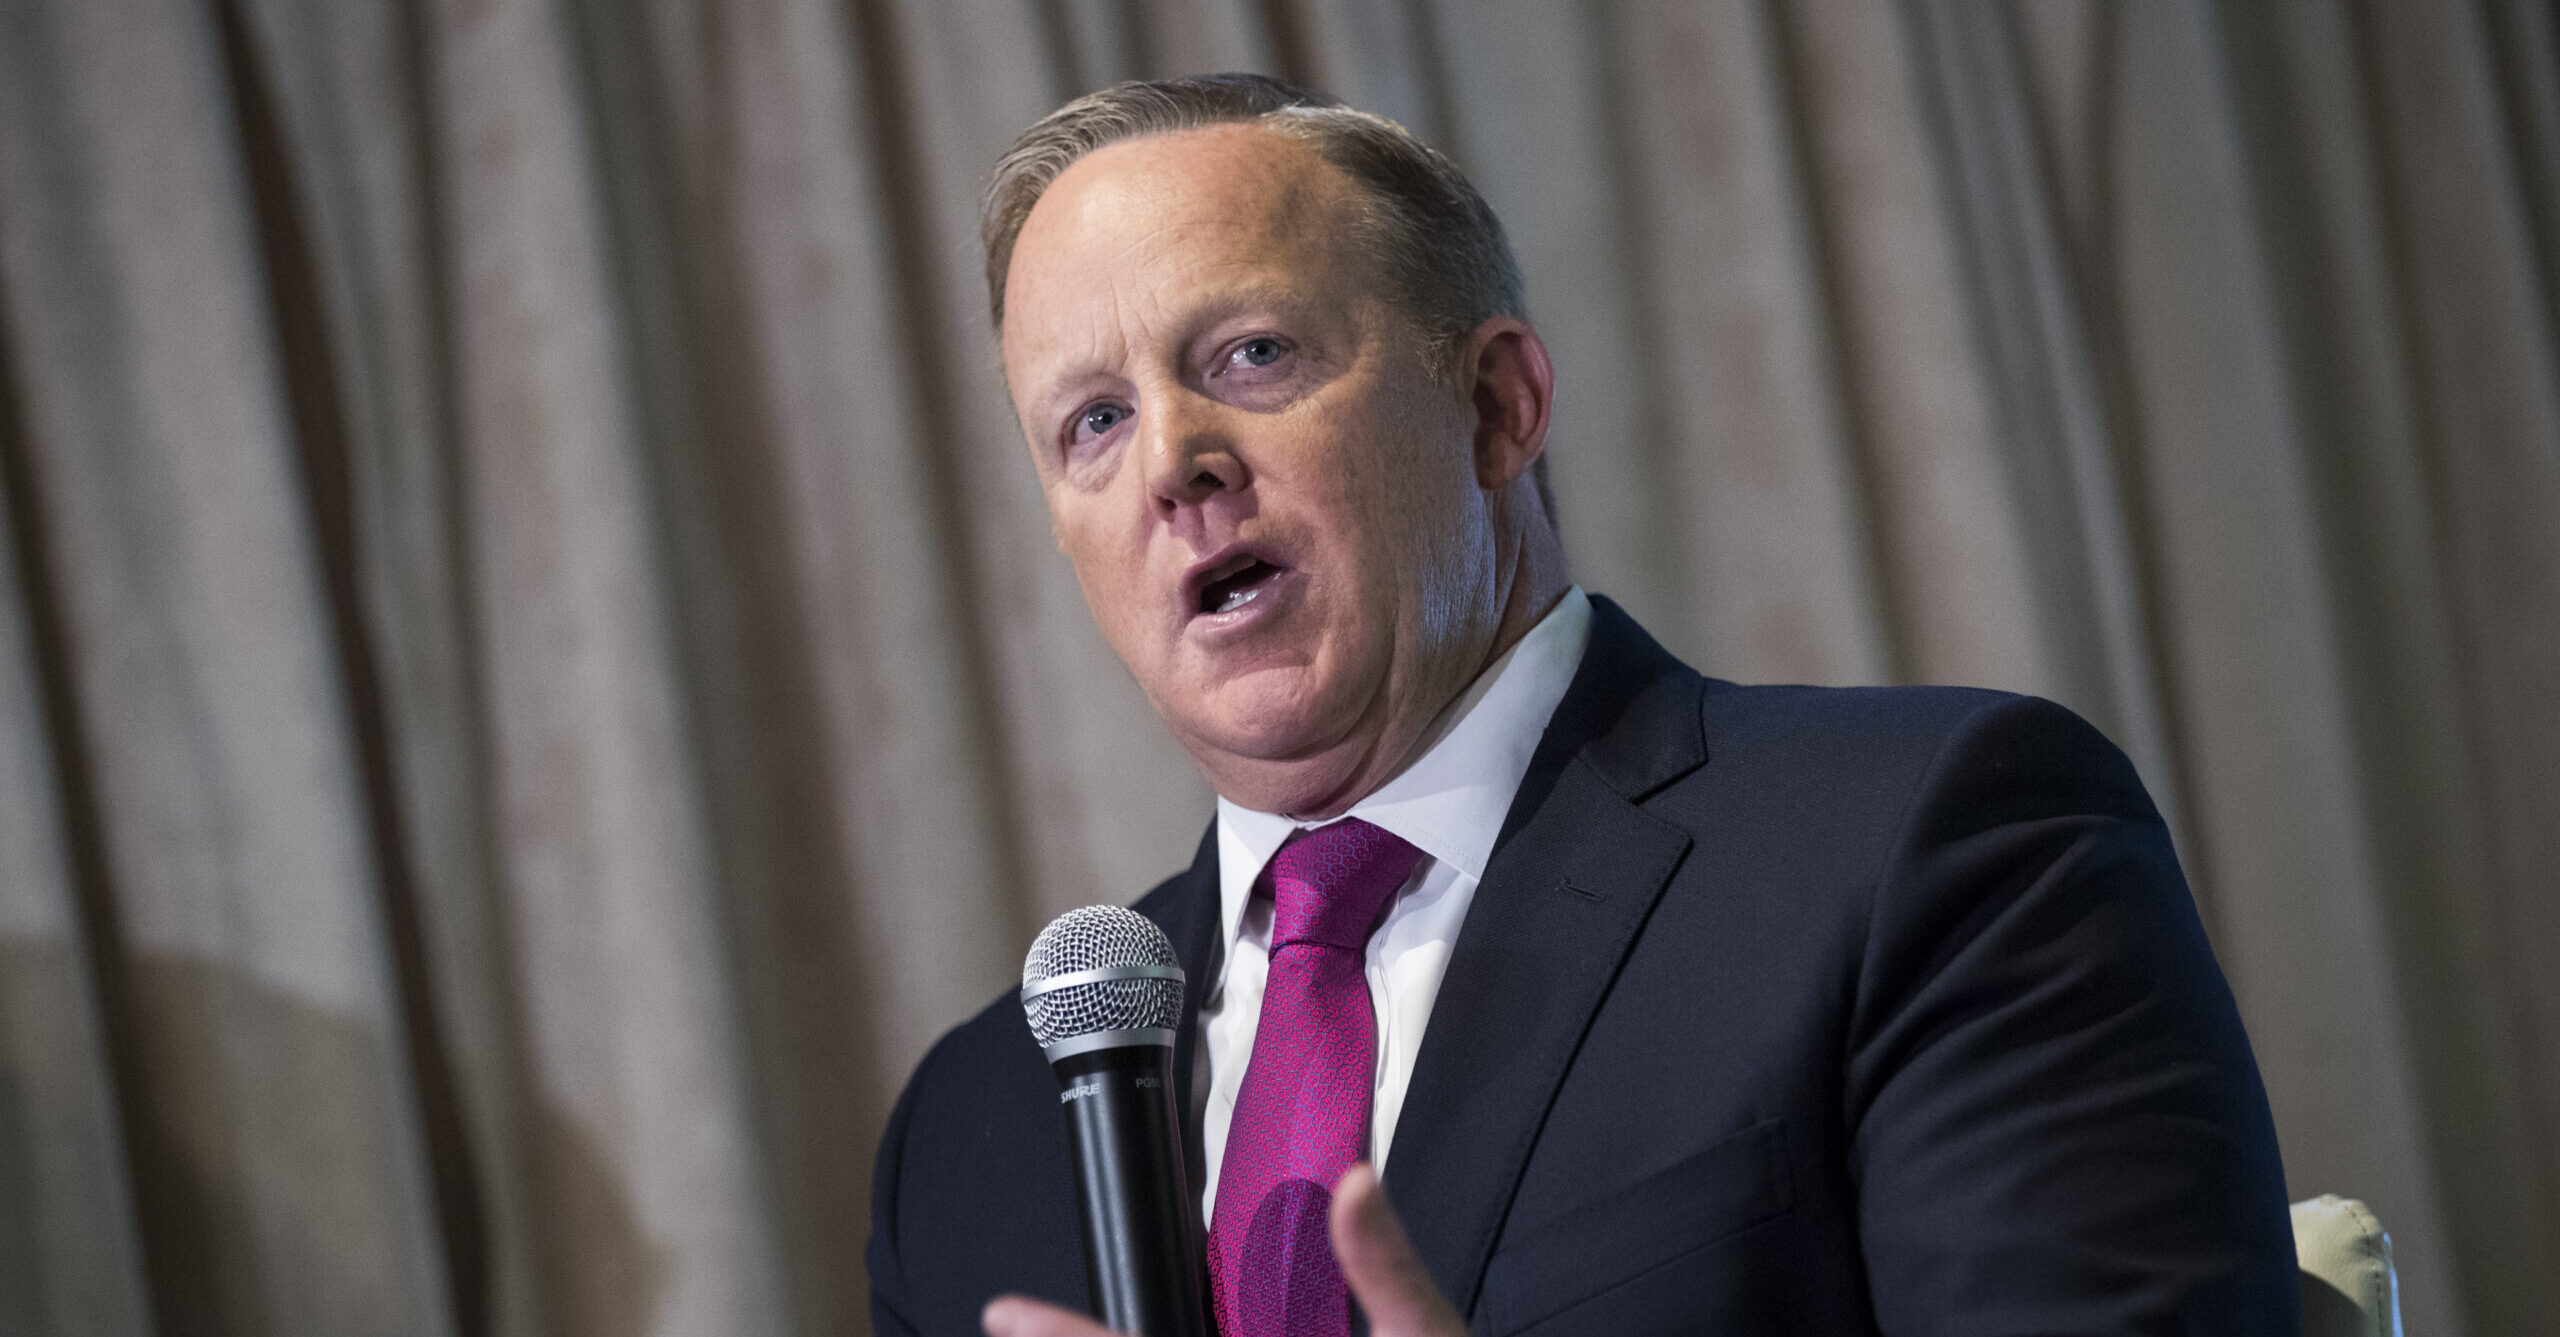 Sean Spicer Dunked on for Confusing Pearl Harbor Attack with D-Day: ‘Majored in History at Trump University’ (mediaite.com)